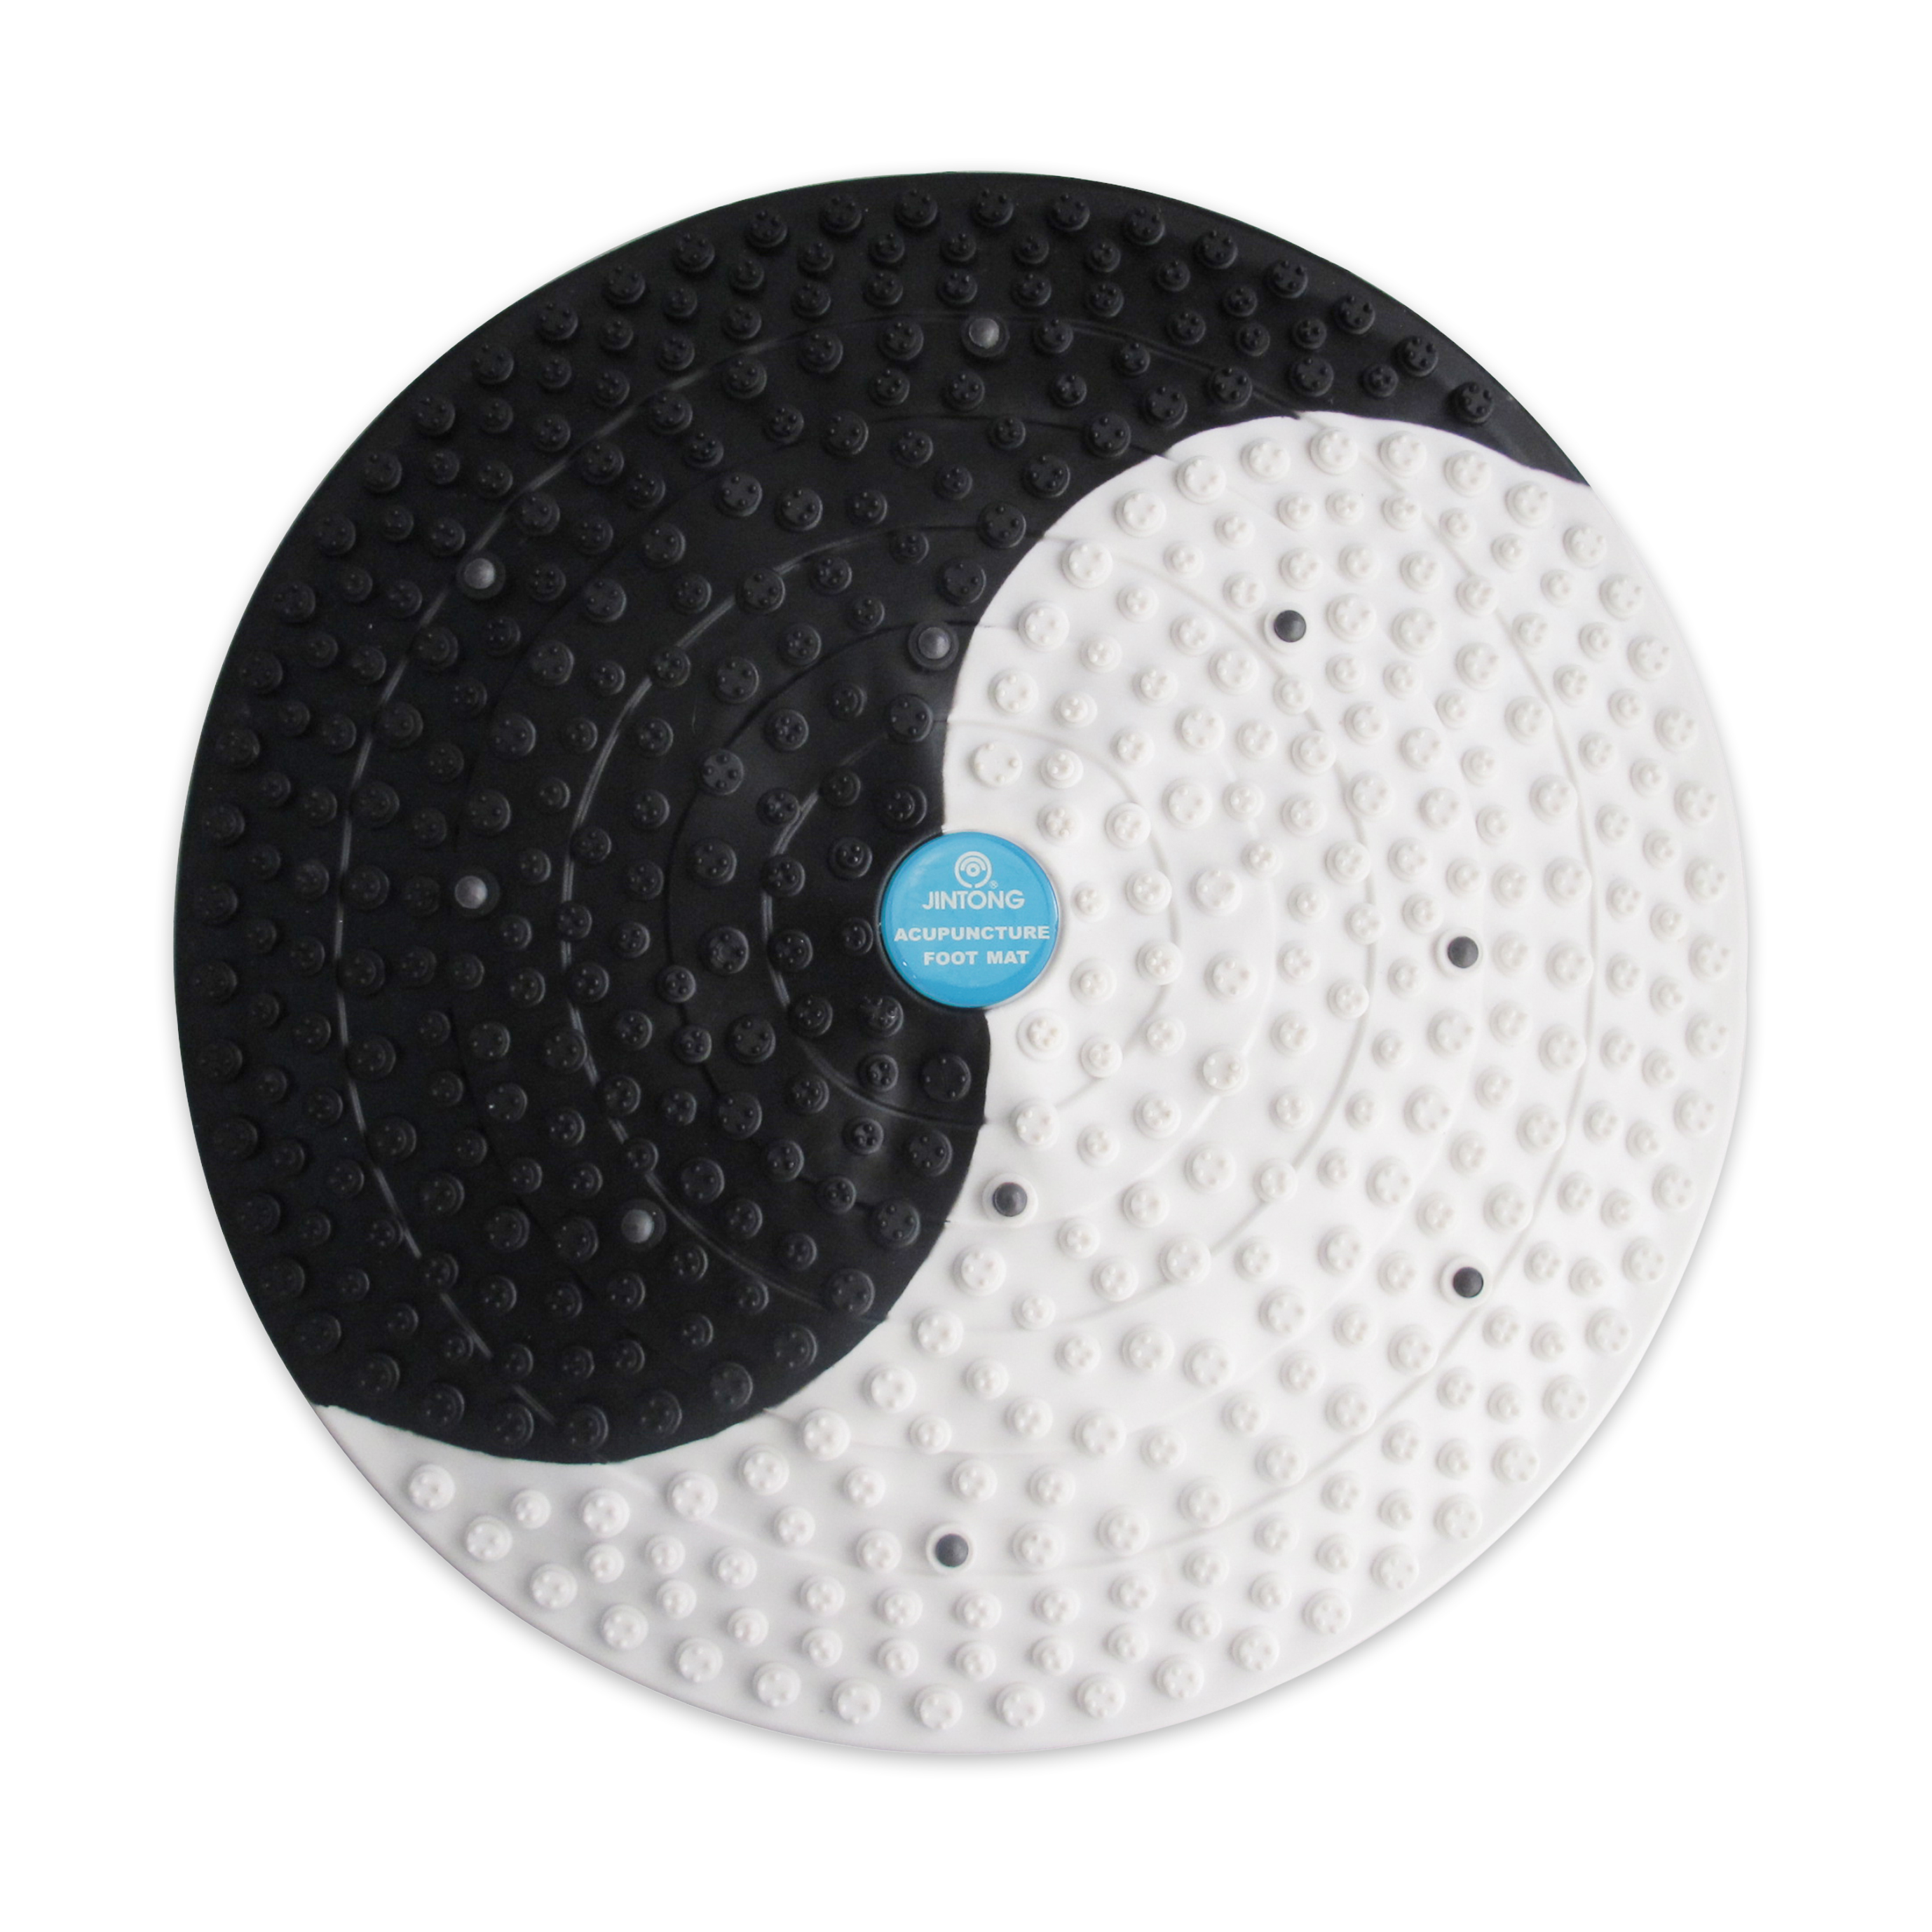 Yin-Yang Foot massage Acupuncture Mat (with magnet)